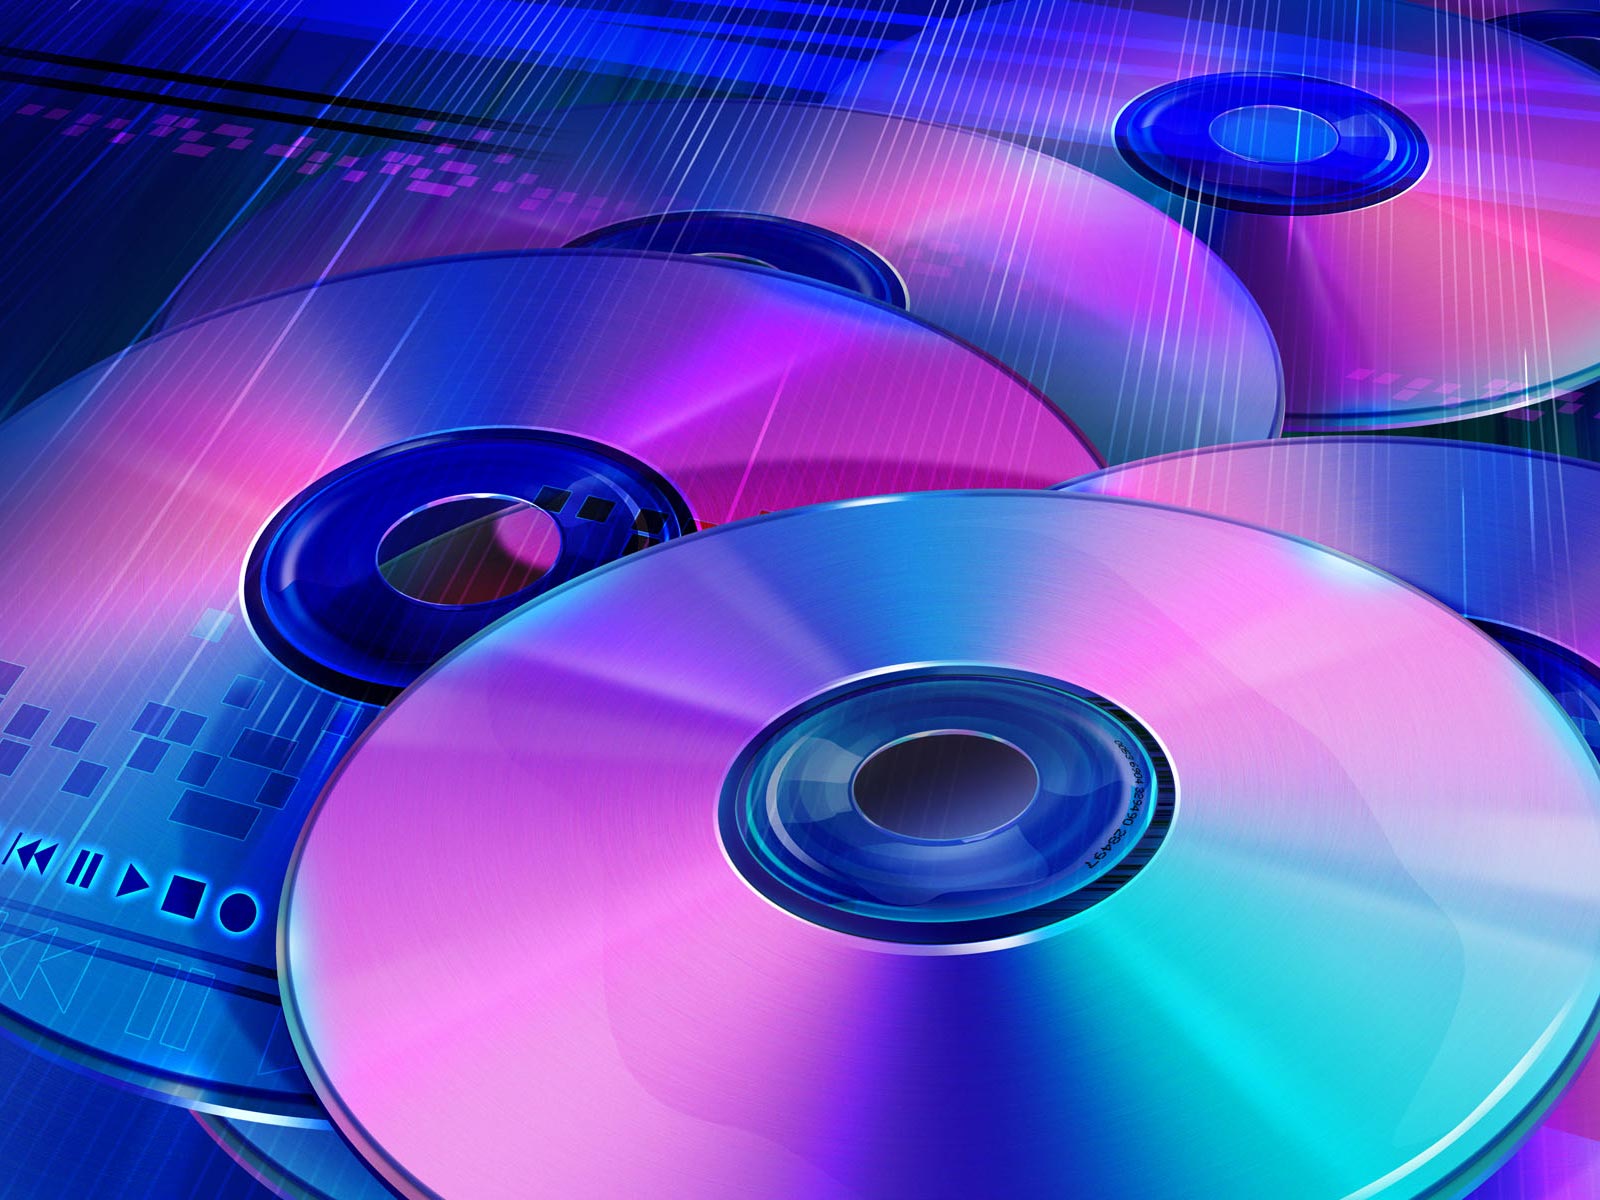 FileCD DVD Collectionsjpg   Wikimedia Commons